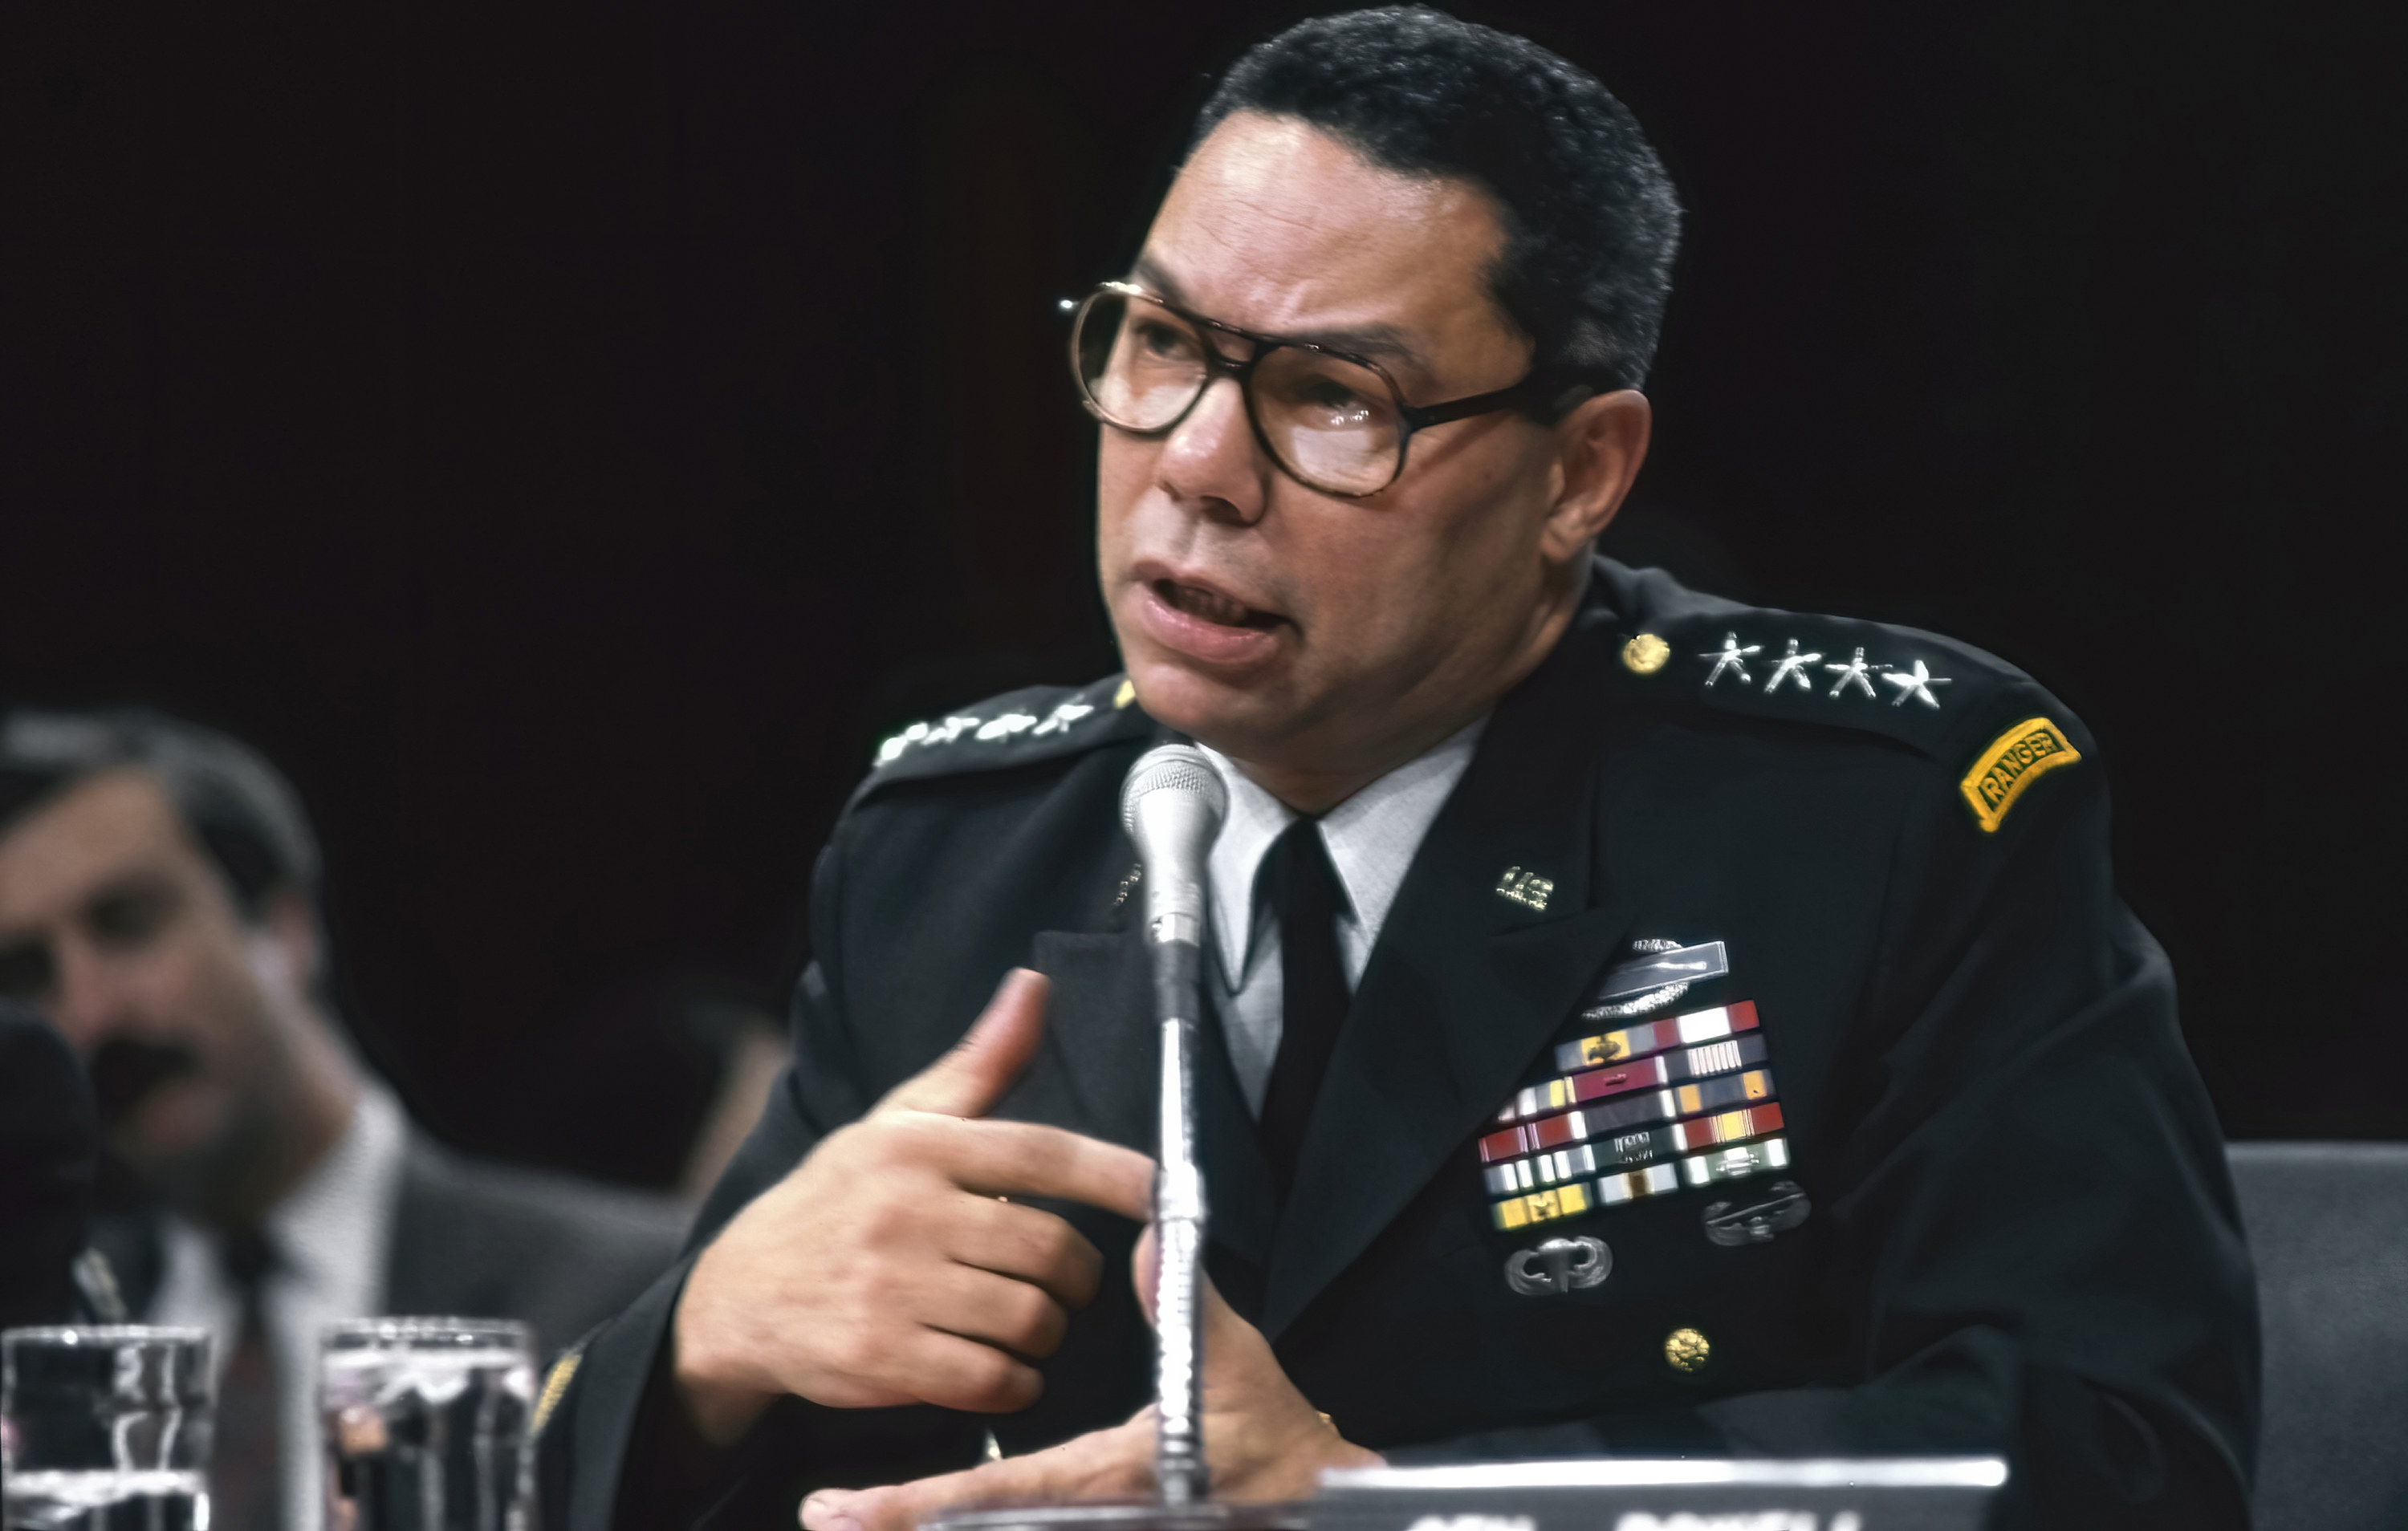 Colin Powell in uniform testifying in congress in front of a microphone